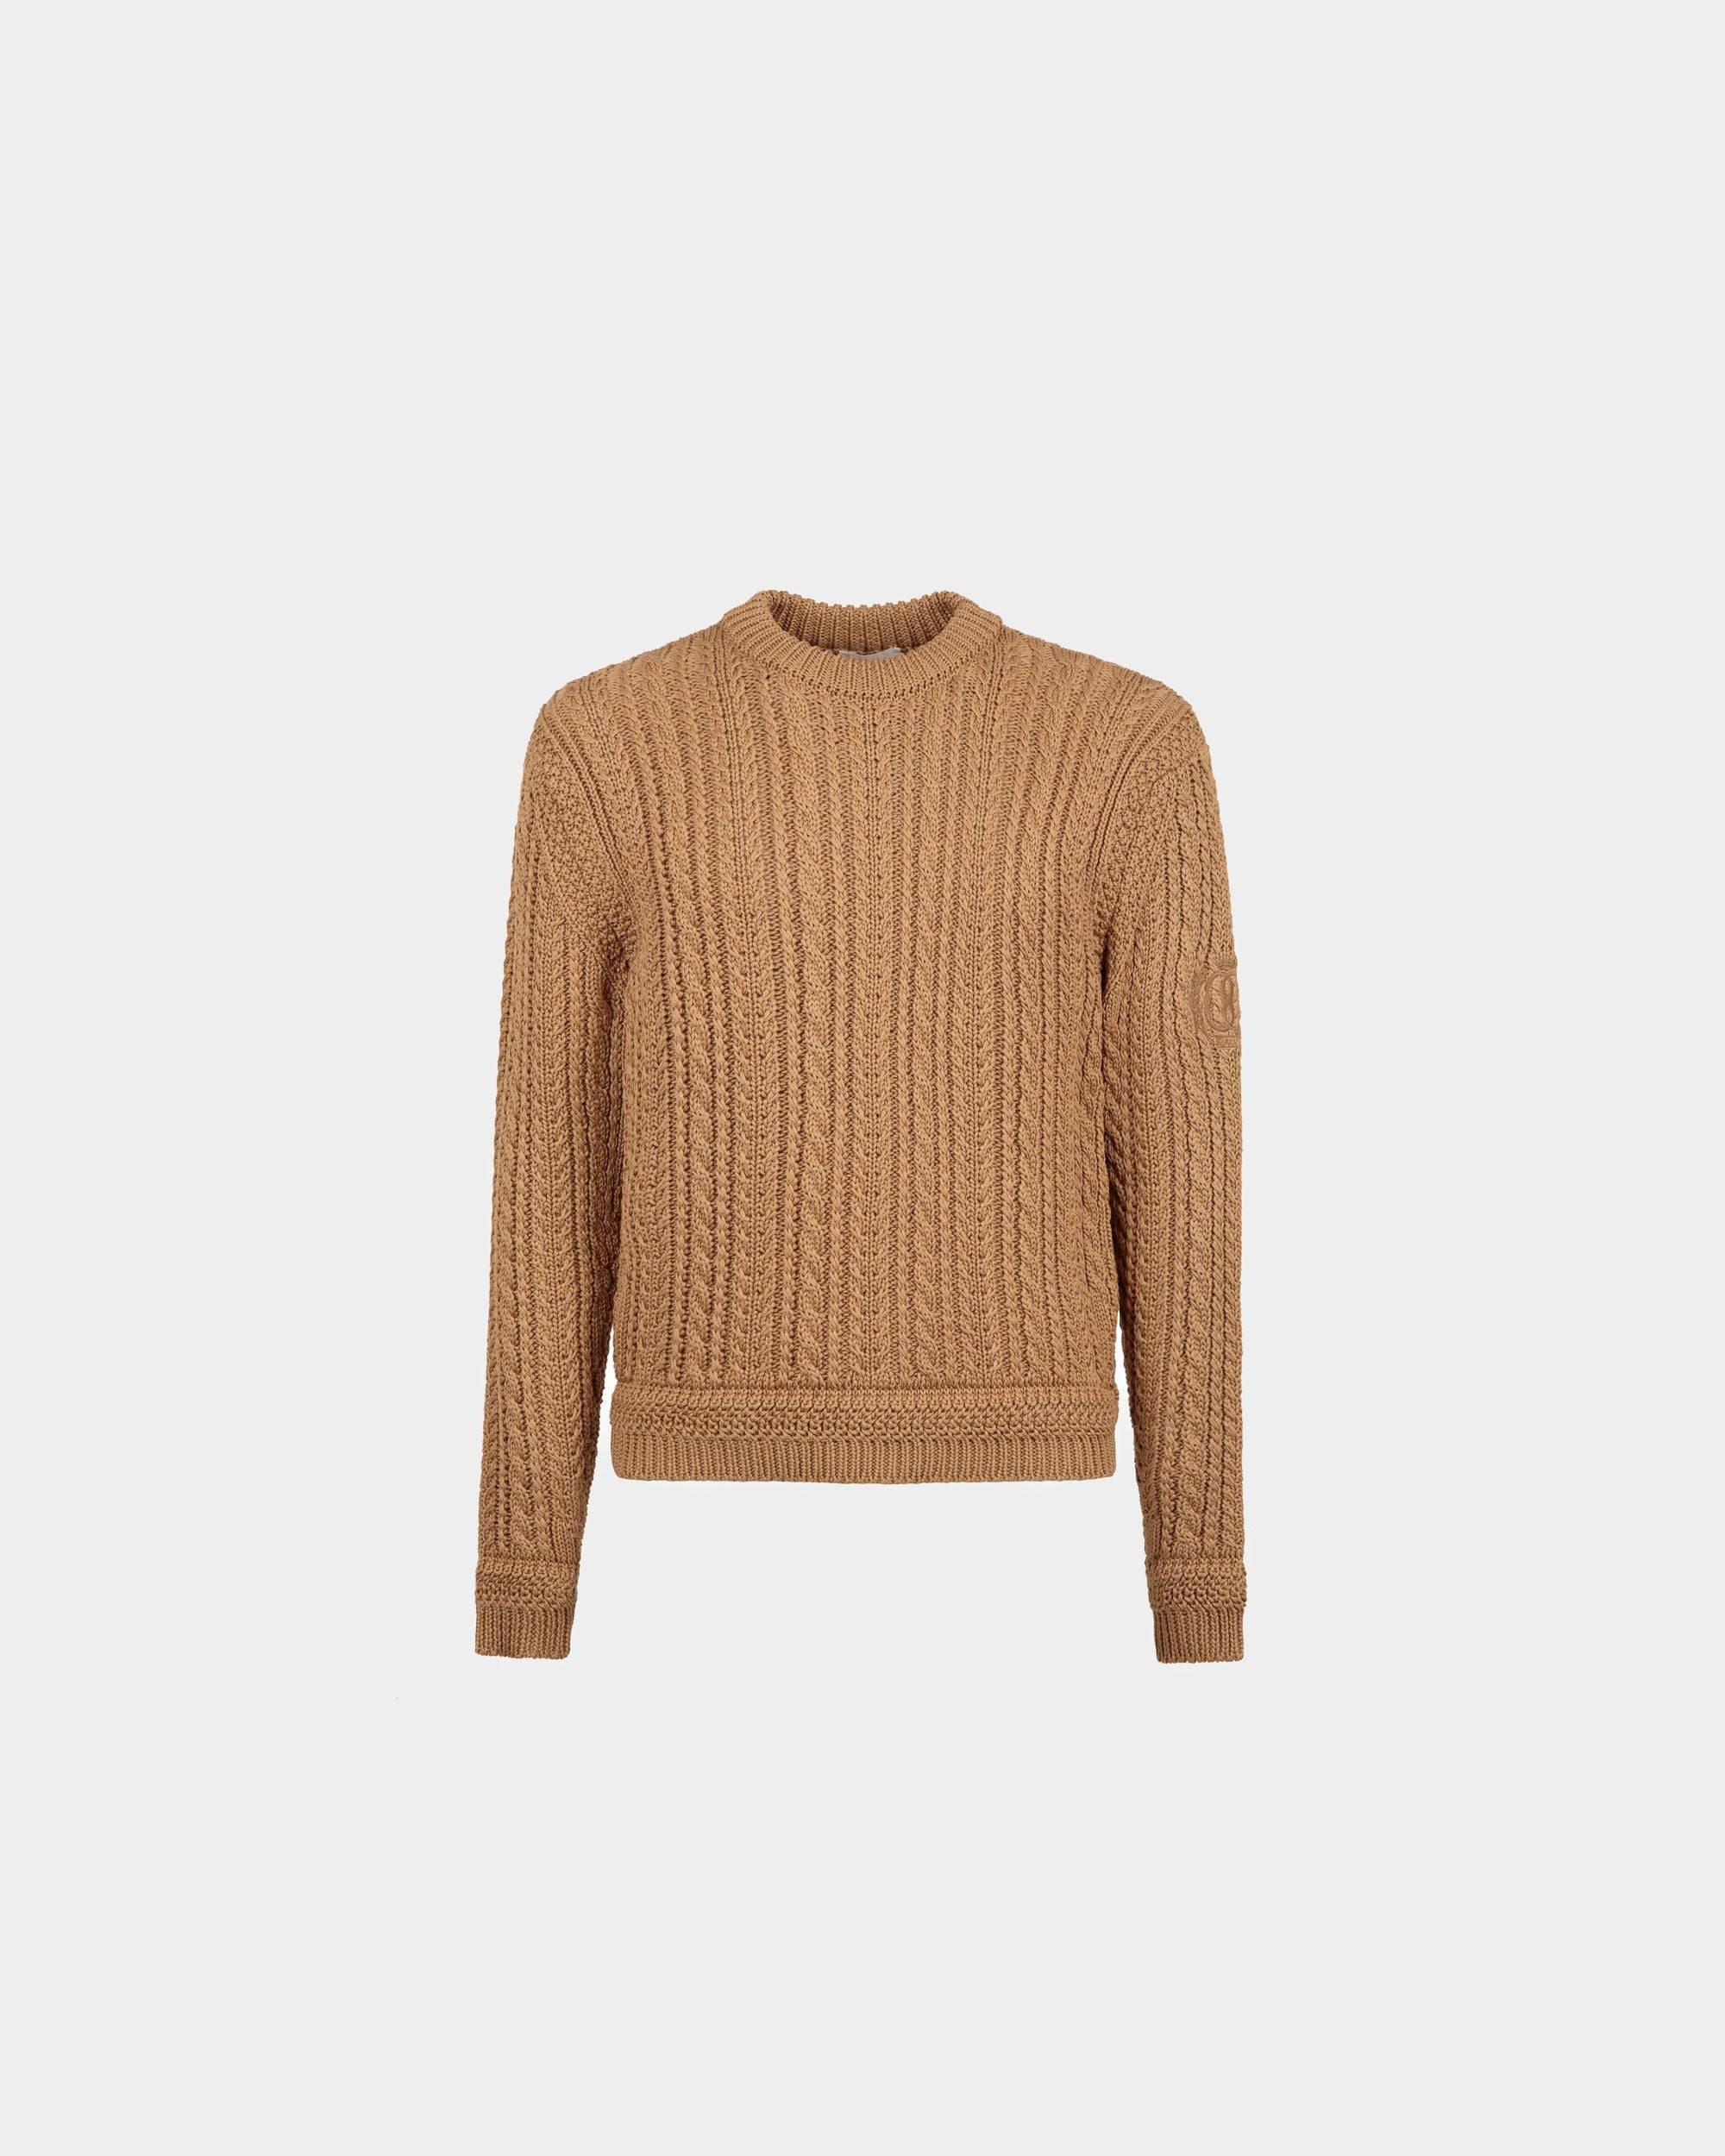 Men's Cable-knit Sweater in Camel Cotton | Bally | Still Life Front